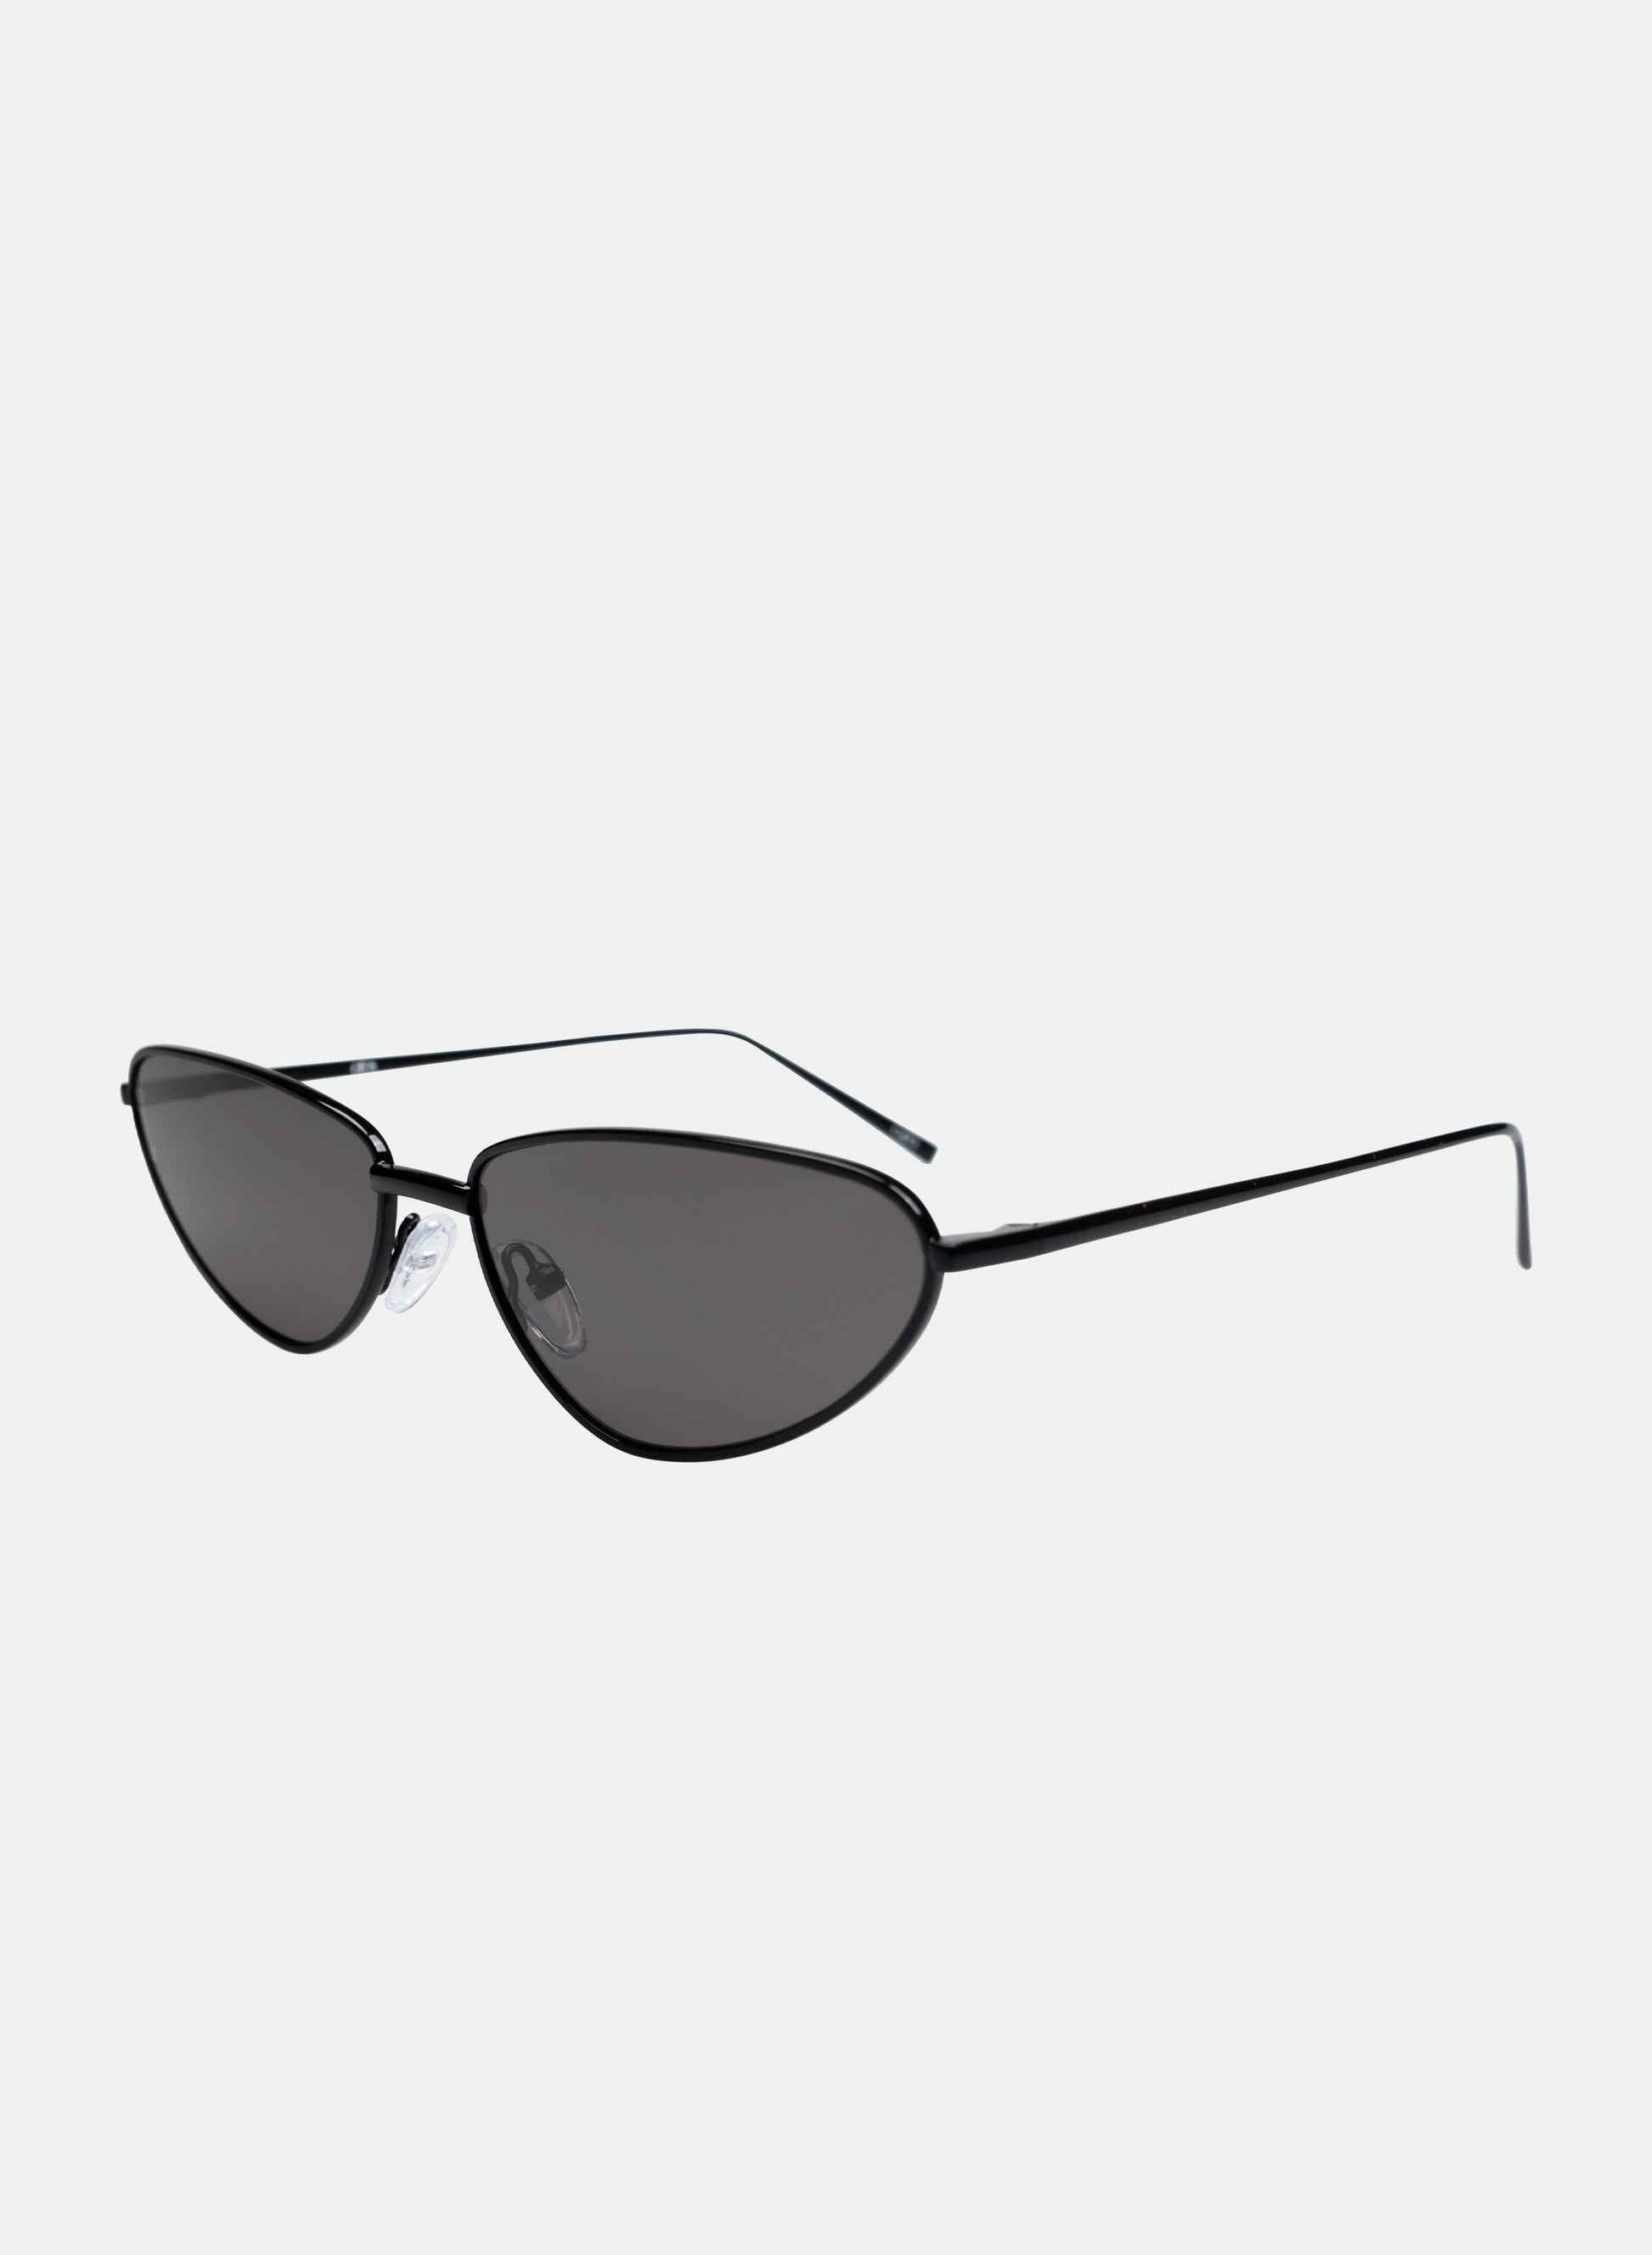 Aster black sunglasses side view